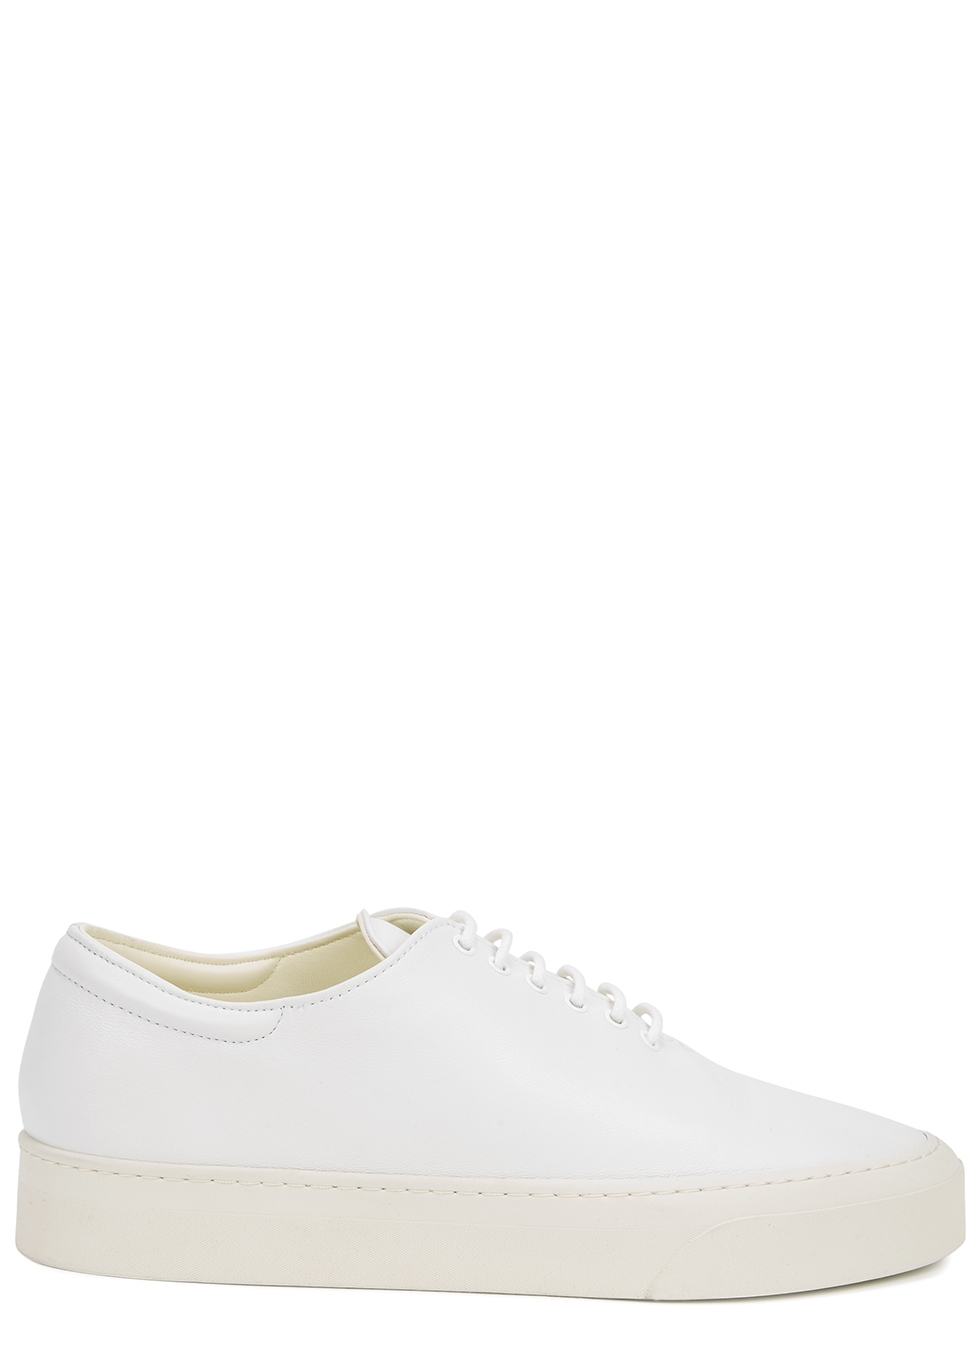 Marie white leather sneakers